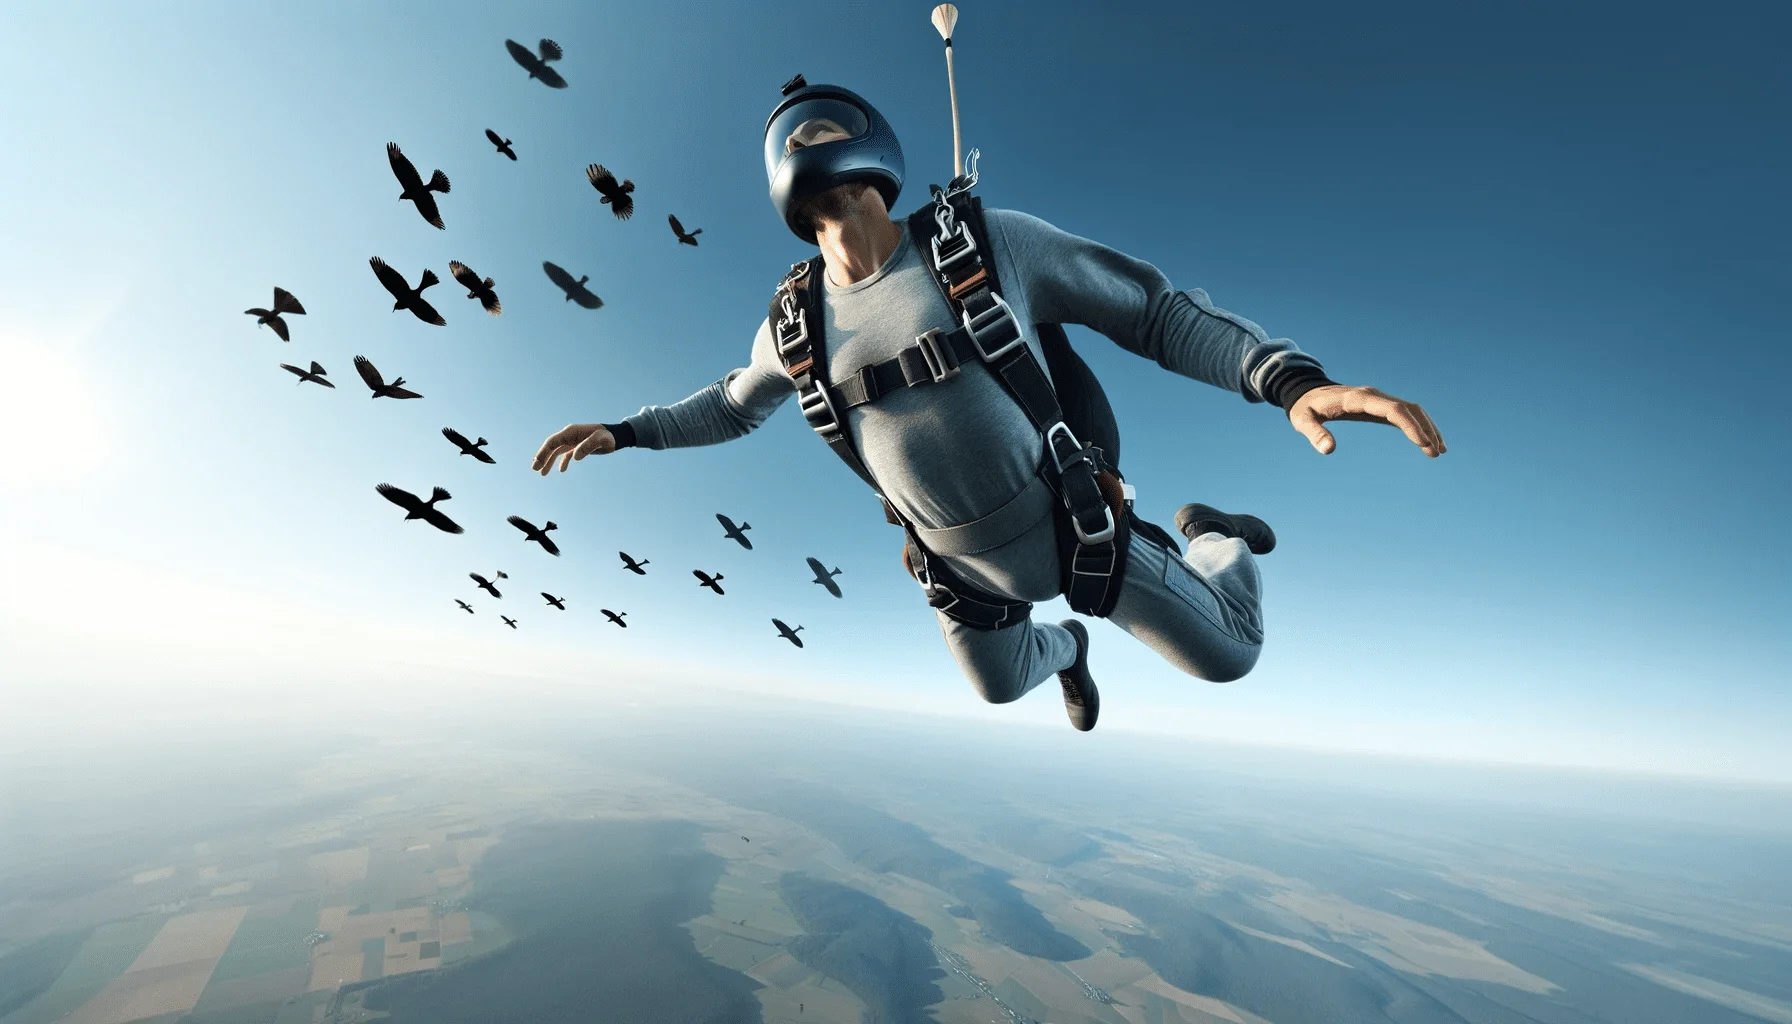 can you hit a bird while skydiving